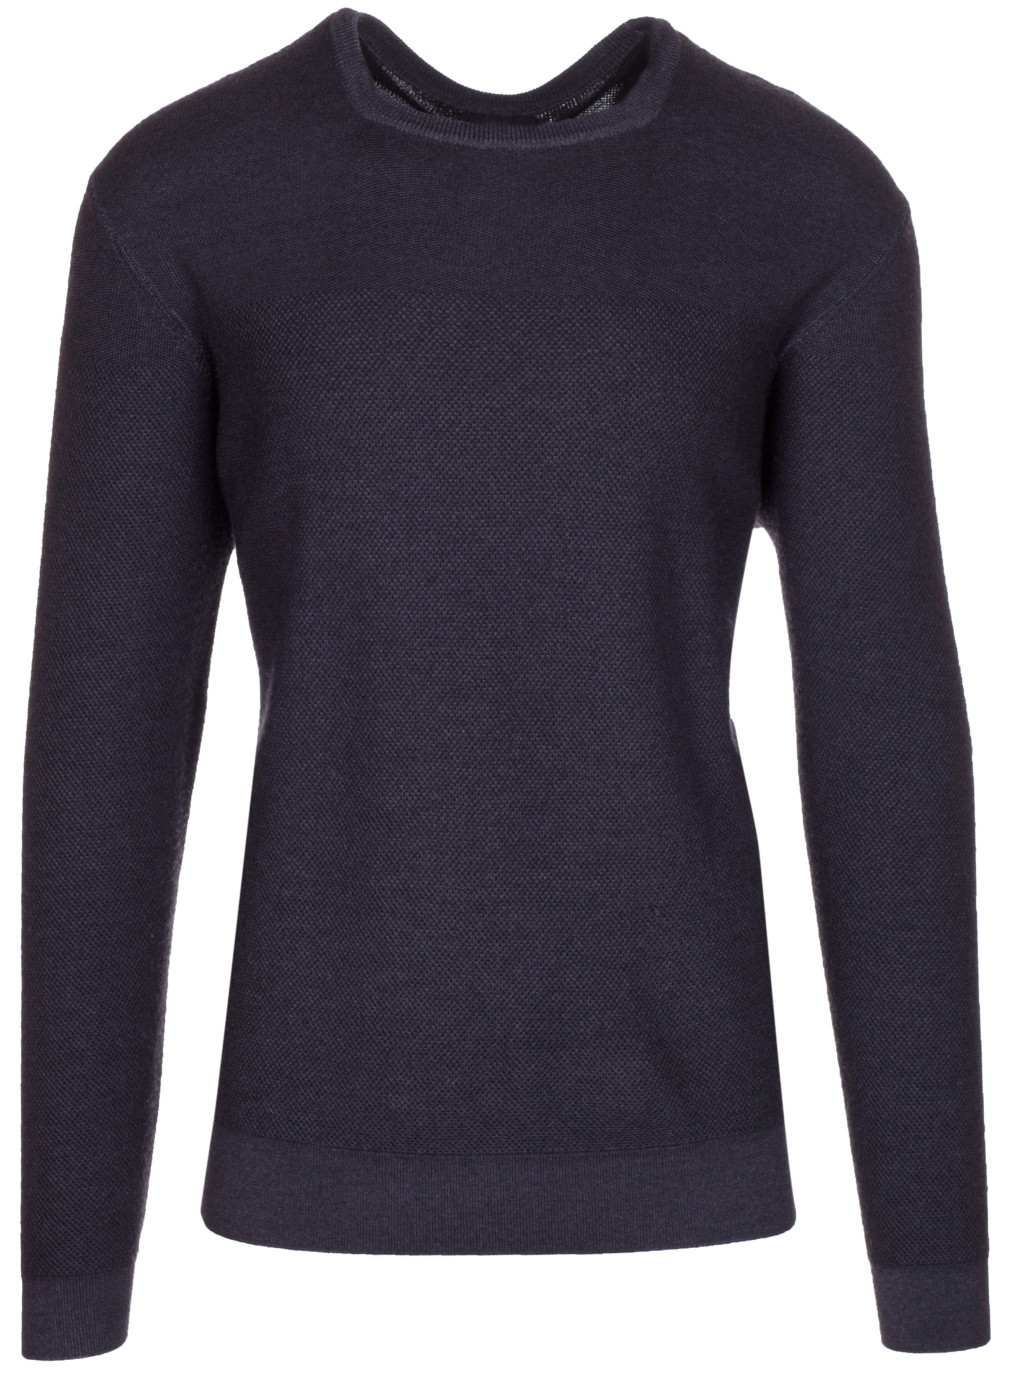 woocommerce-673321-2209615.cloudwaysapps.com-armani-collezioni-mens-dark-grey-100-wool-pullover-knitwear-high-neck-sweater